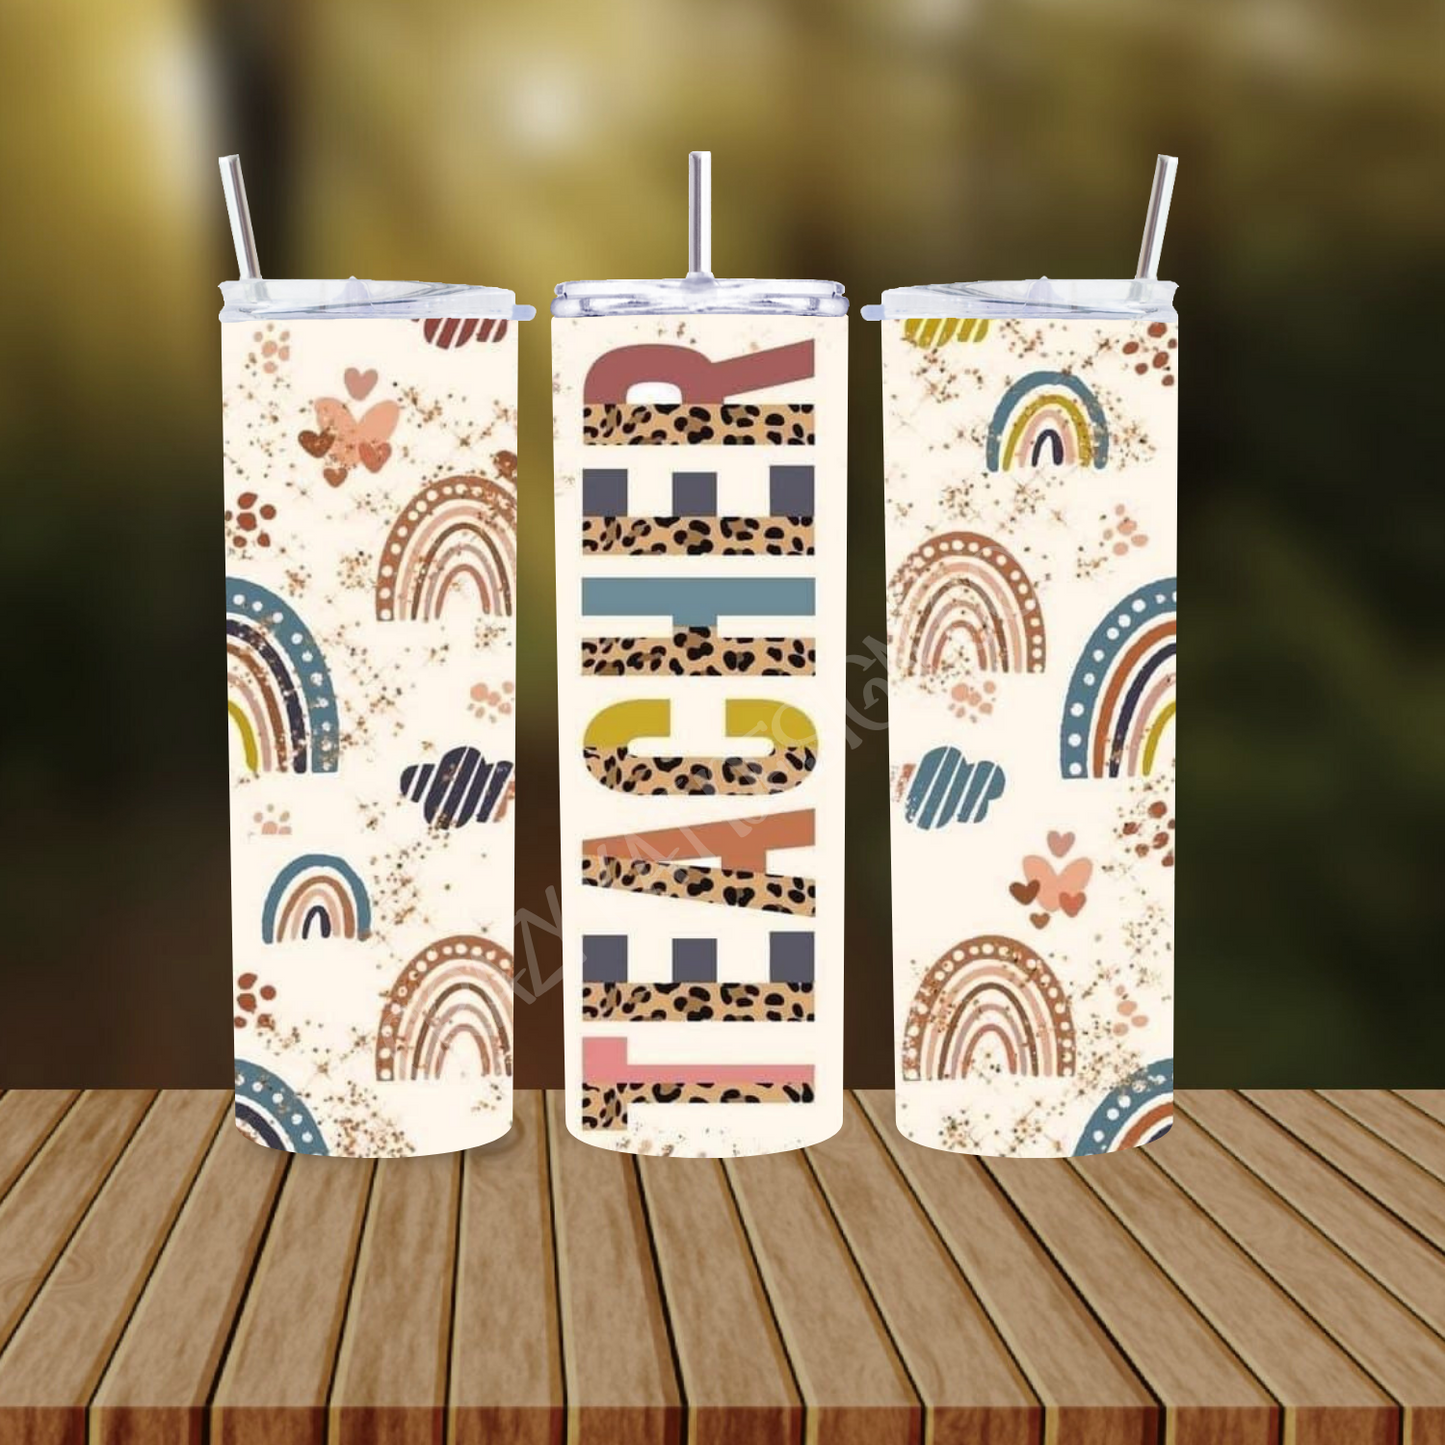 CUSTOMIZABLE TEACHER HOT AND COLD TUMBLERS